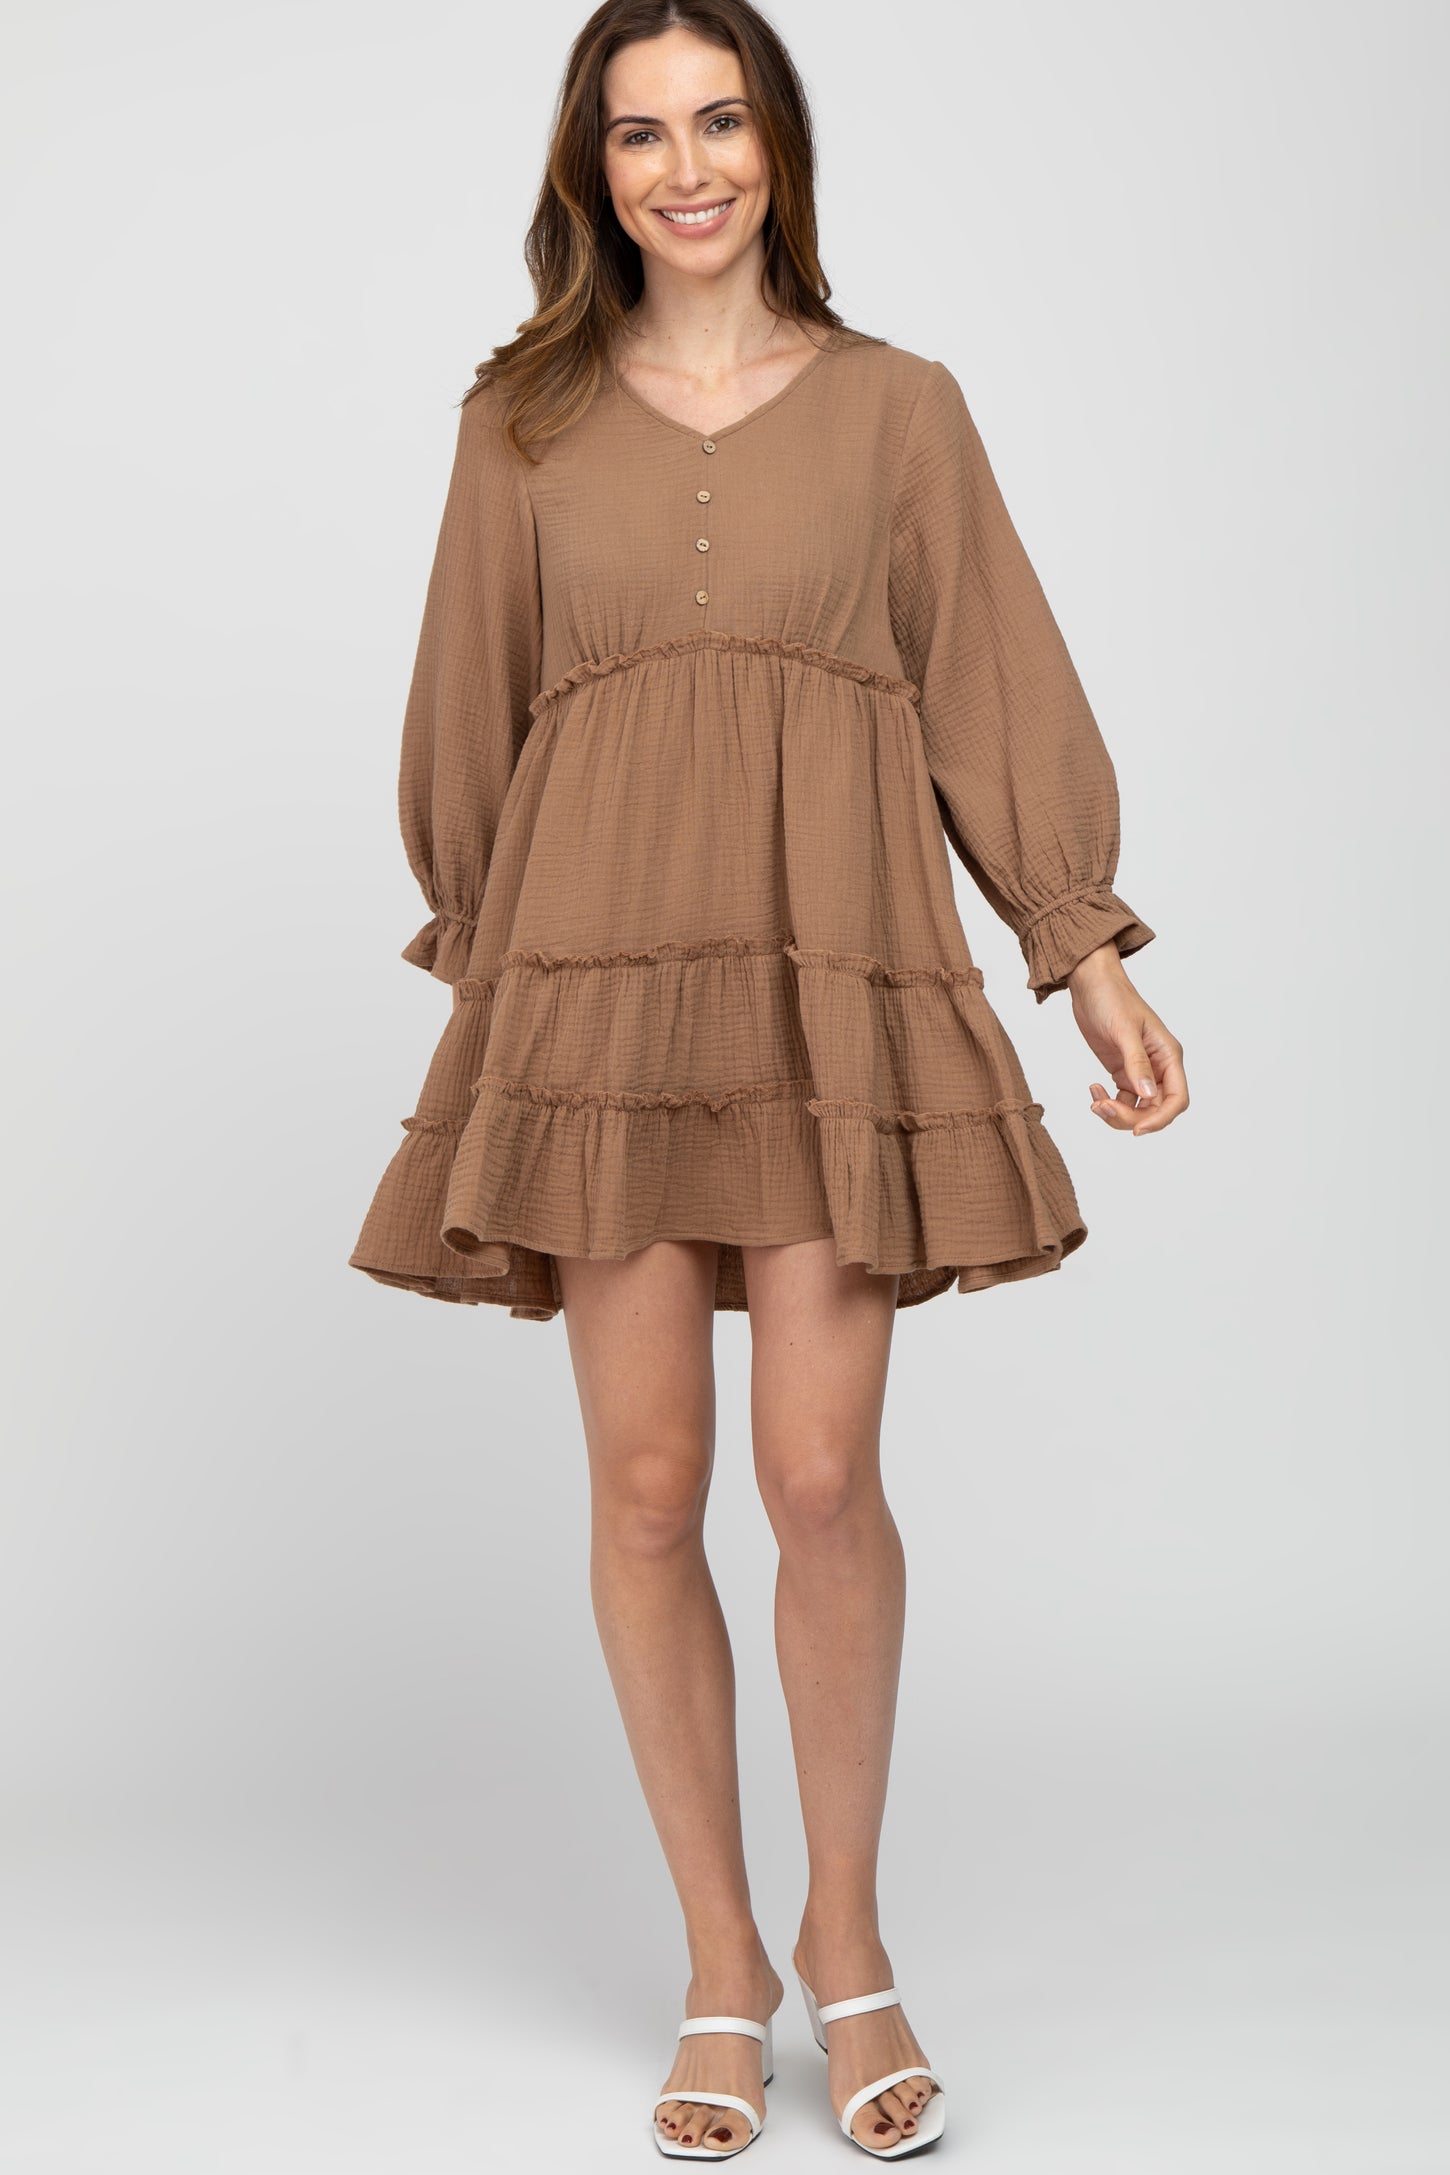 Taupe Button Accent Long Sleeve Tiered Maternity Dress